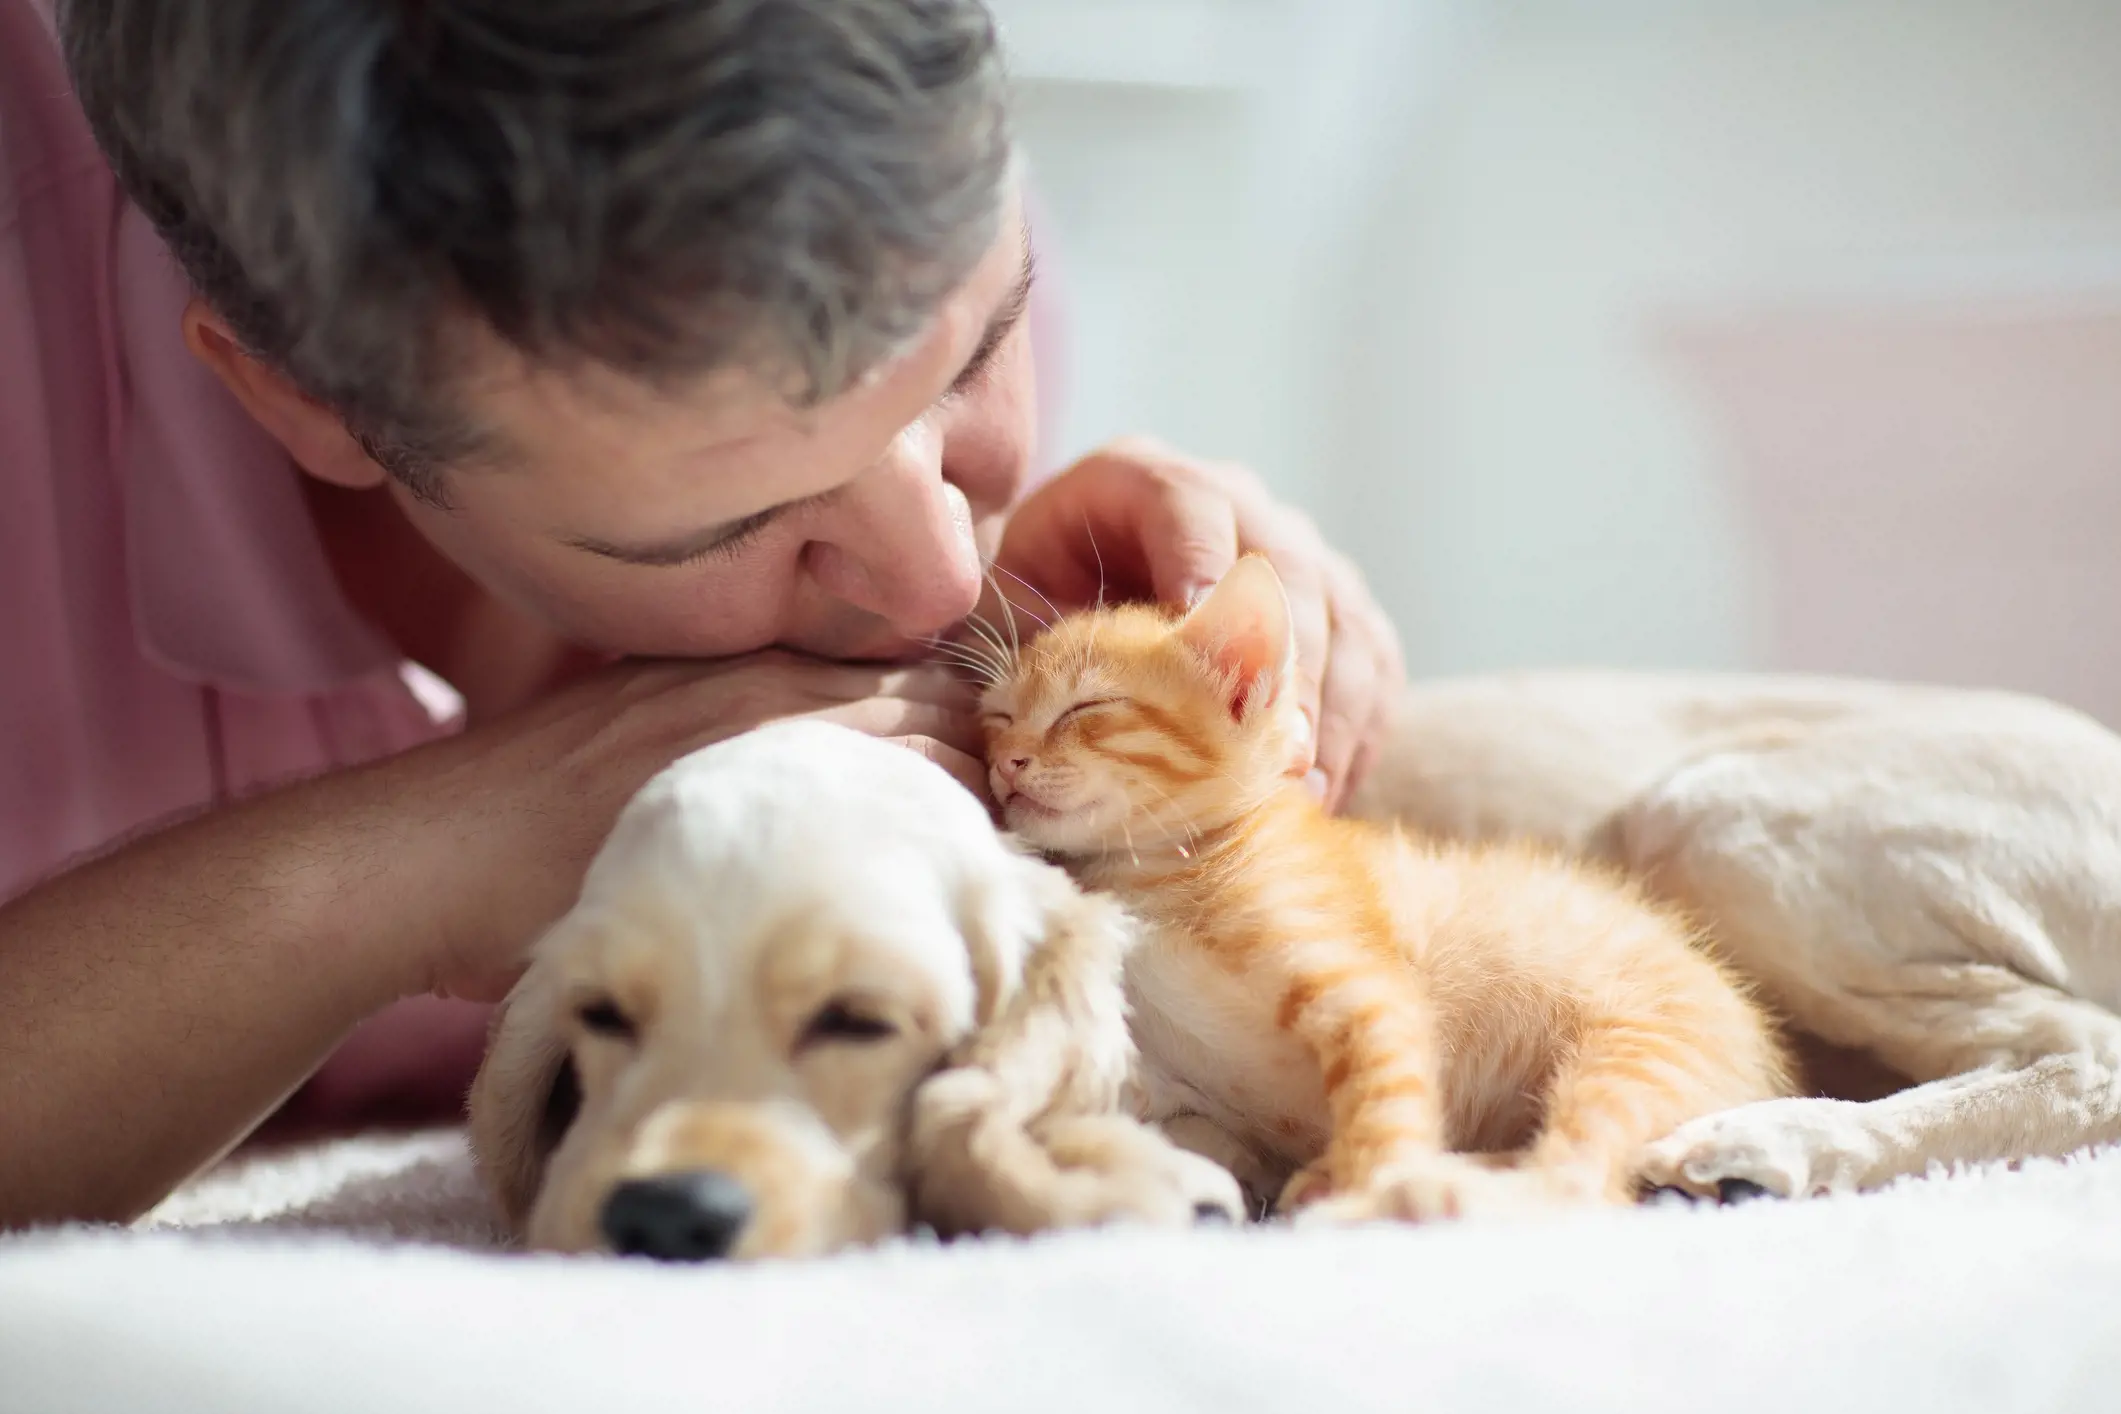 A man kissing the head of a kitten as it leans against a puppy